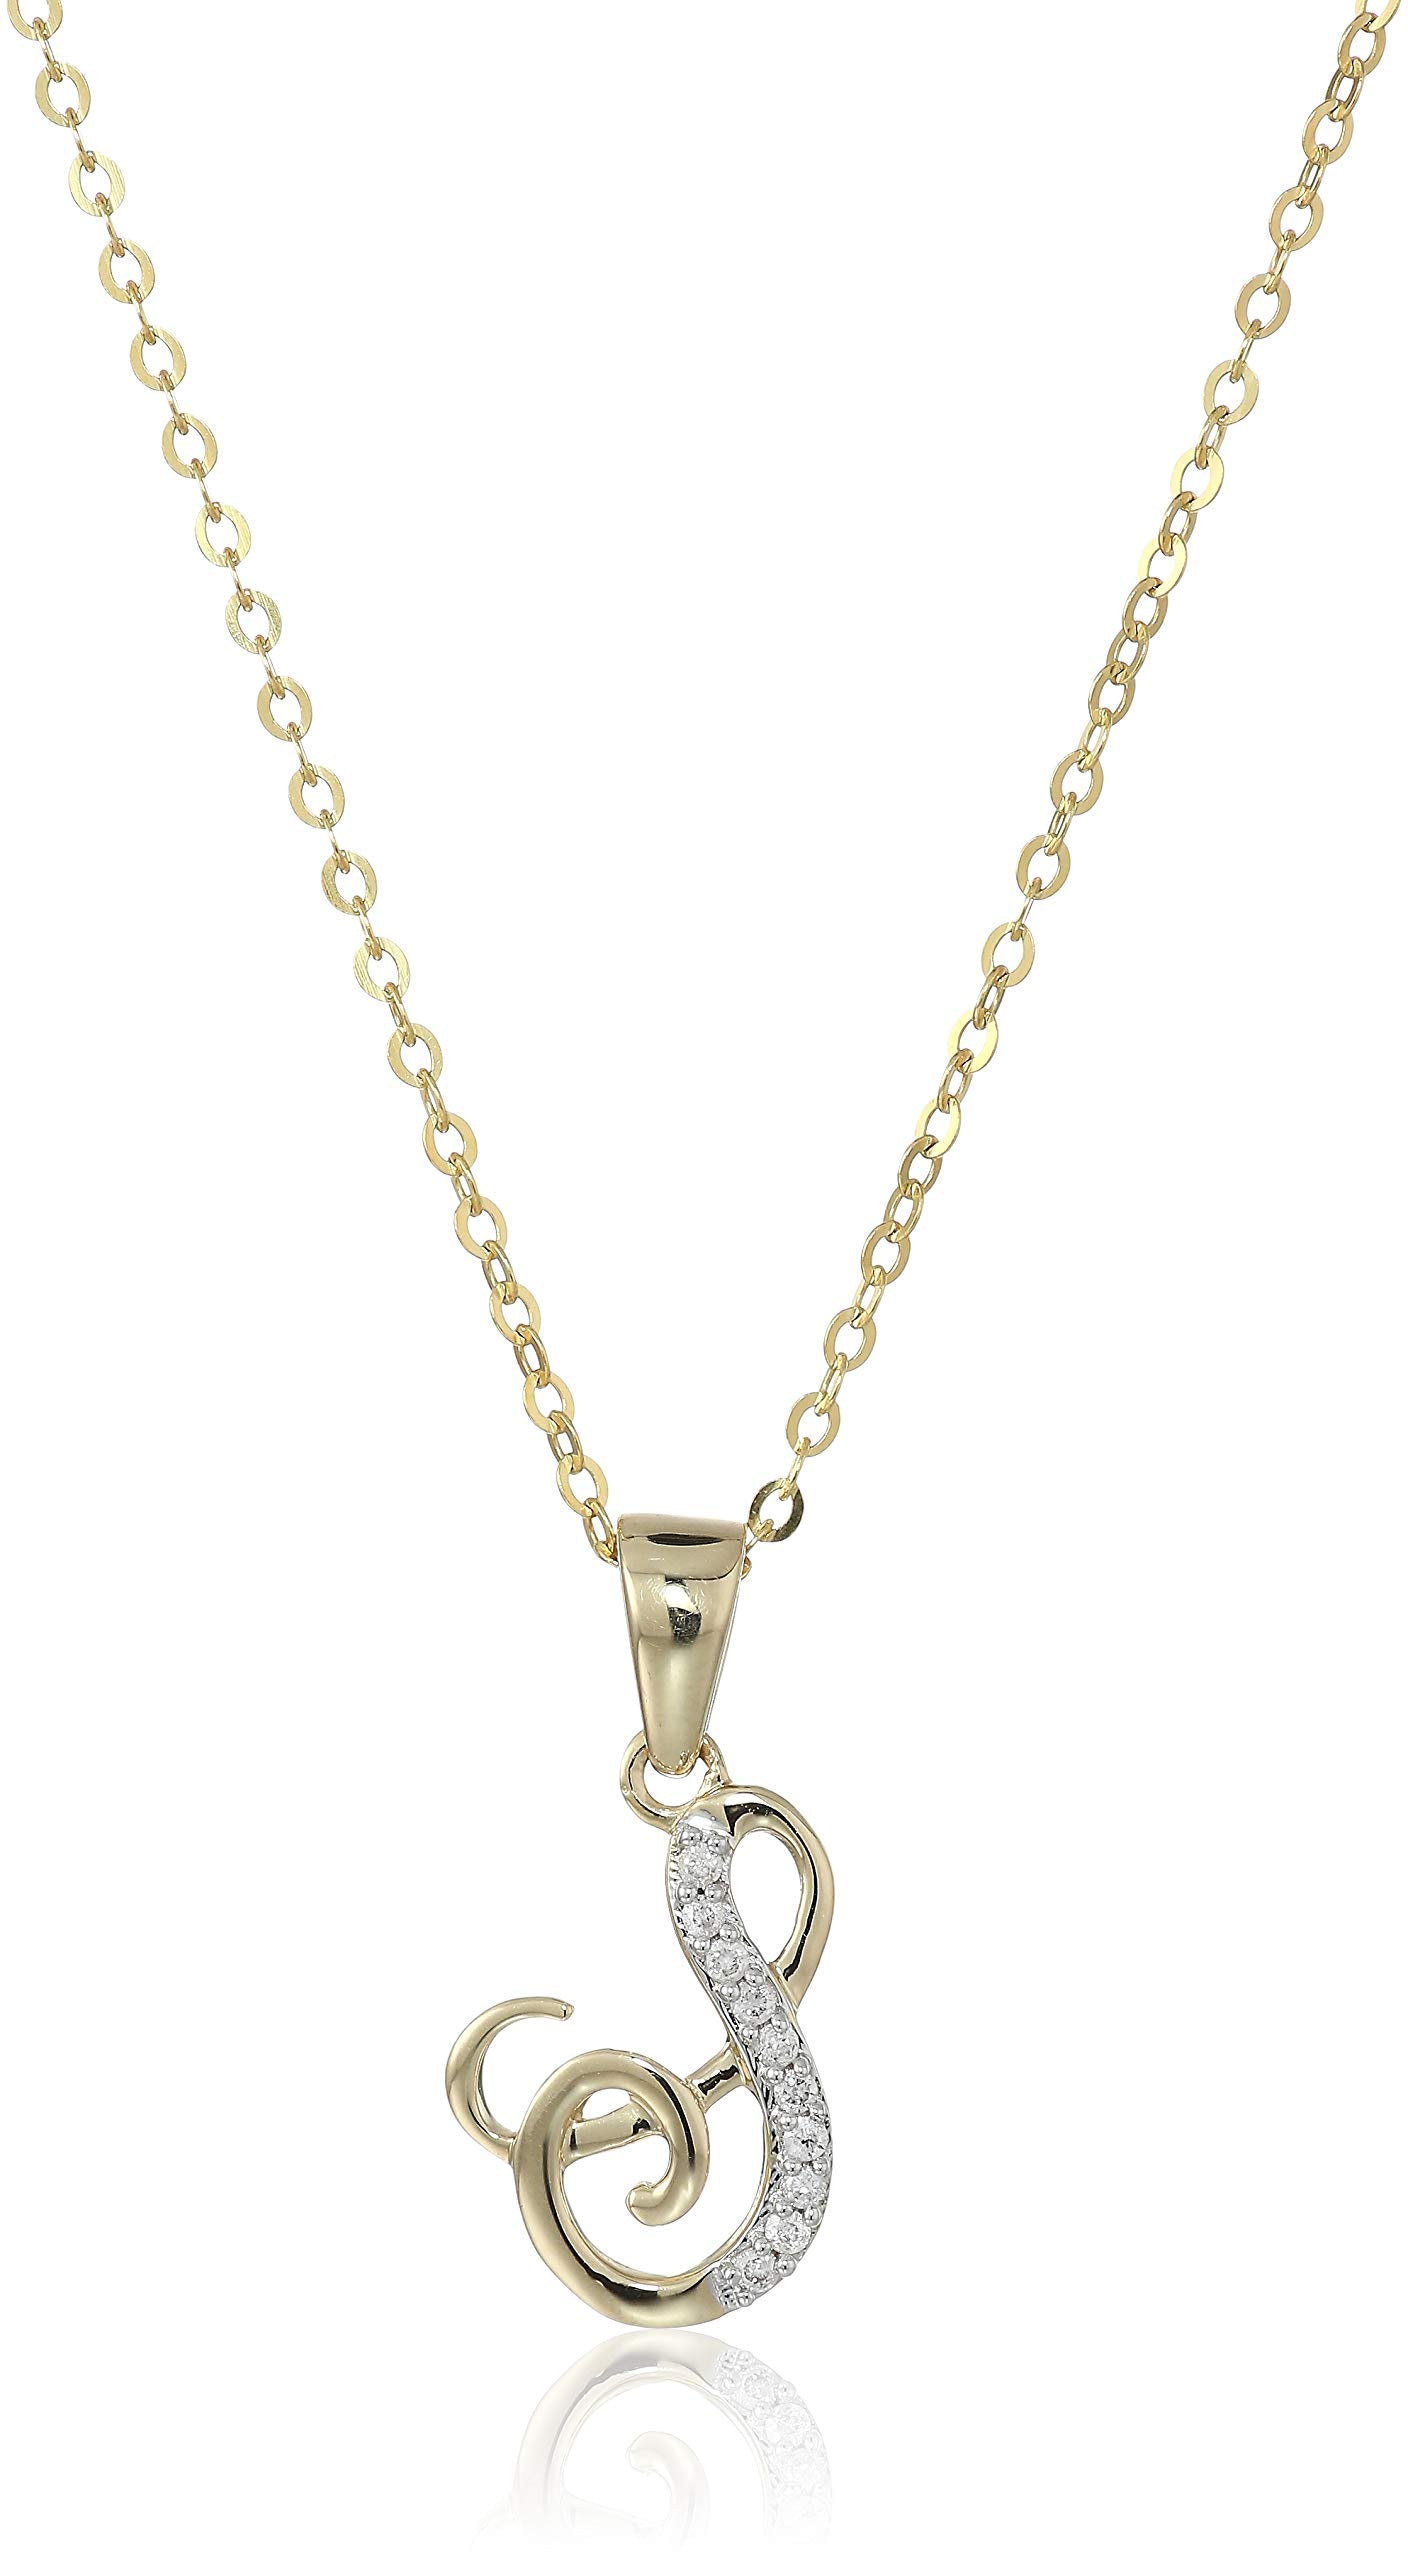 1/20 cttw Diamond Musical Pendant Necklace 14K Yellow Gold with 18 Inch Chain